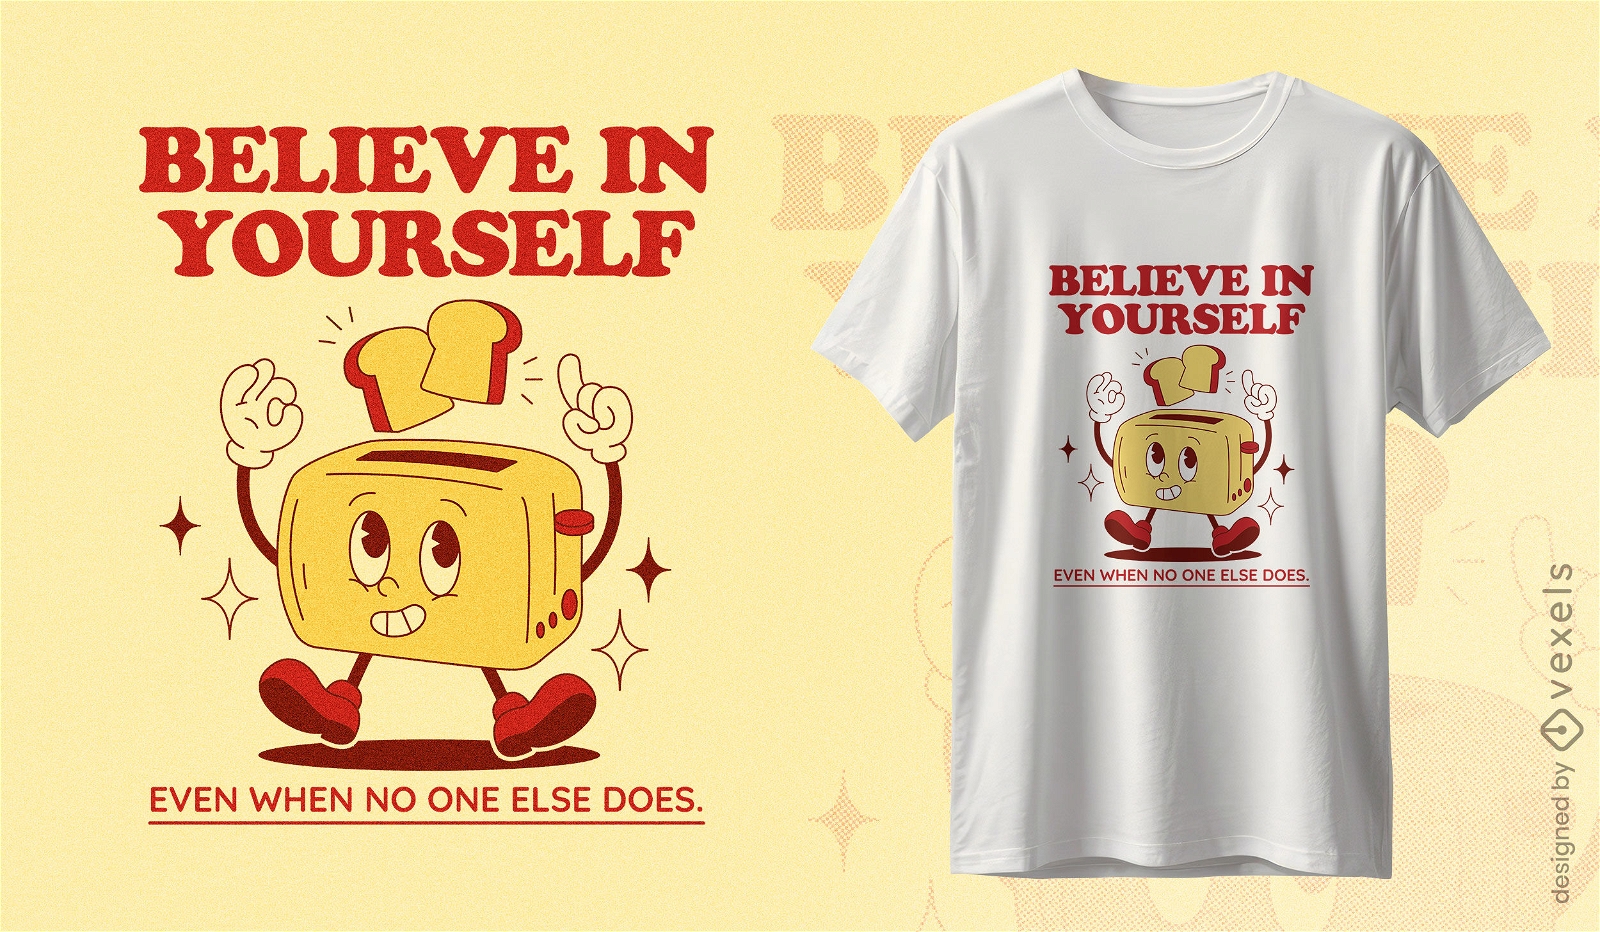 Believe in yourself toaster t-shirt design